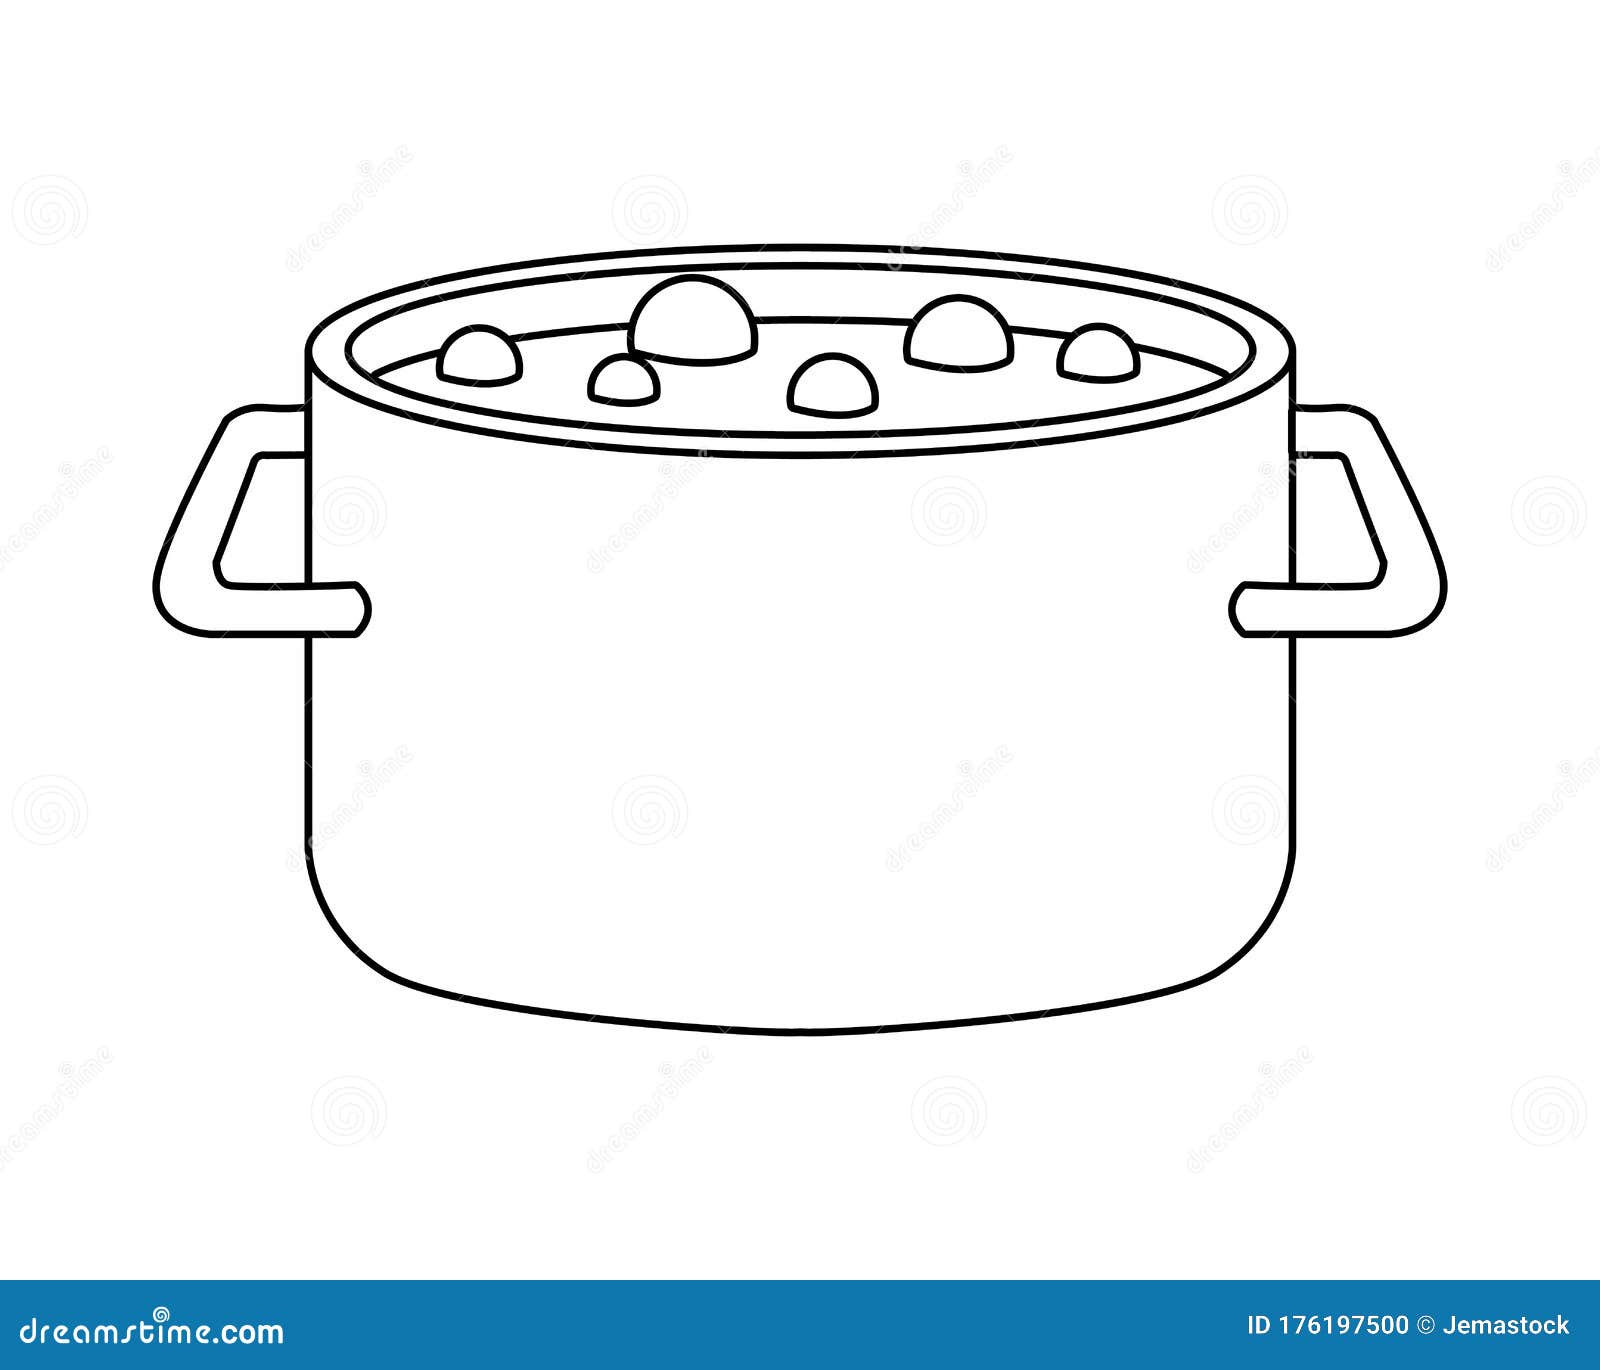 https://thumbs.dreamstime.com/z/pot-boiling-water-isolated-icon-vector-illustration-design-pot-boiling-water-isolated-icon-176197500.jpg